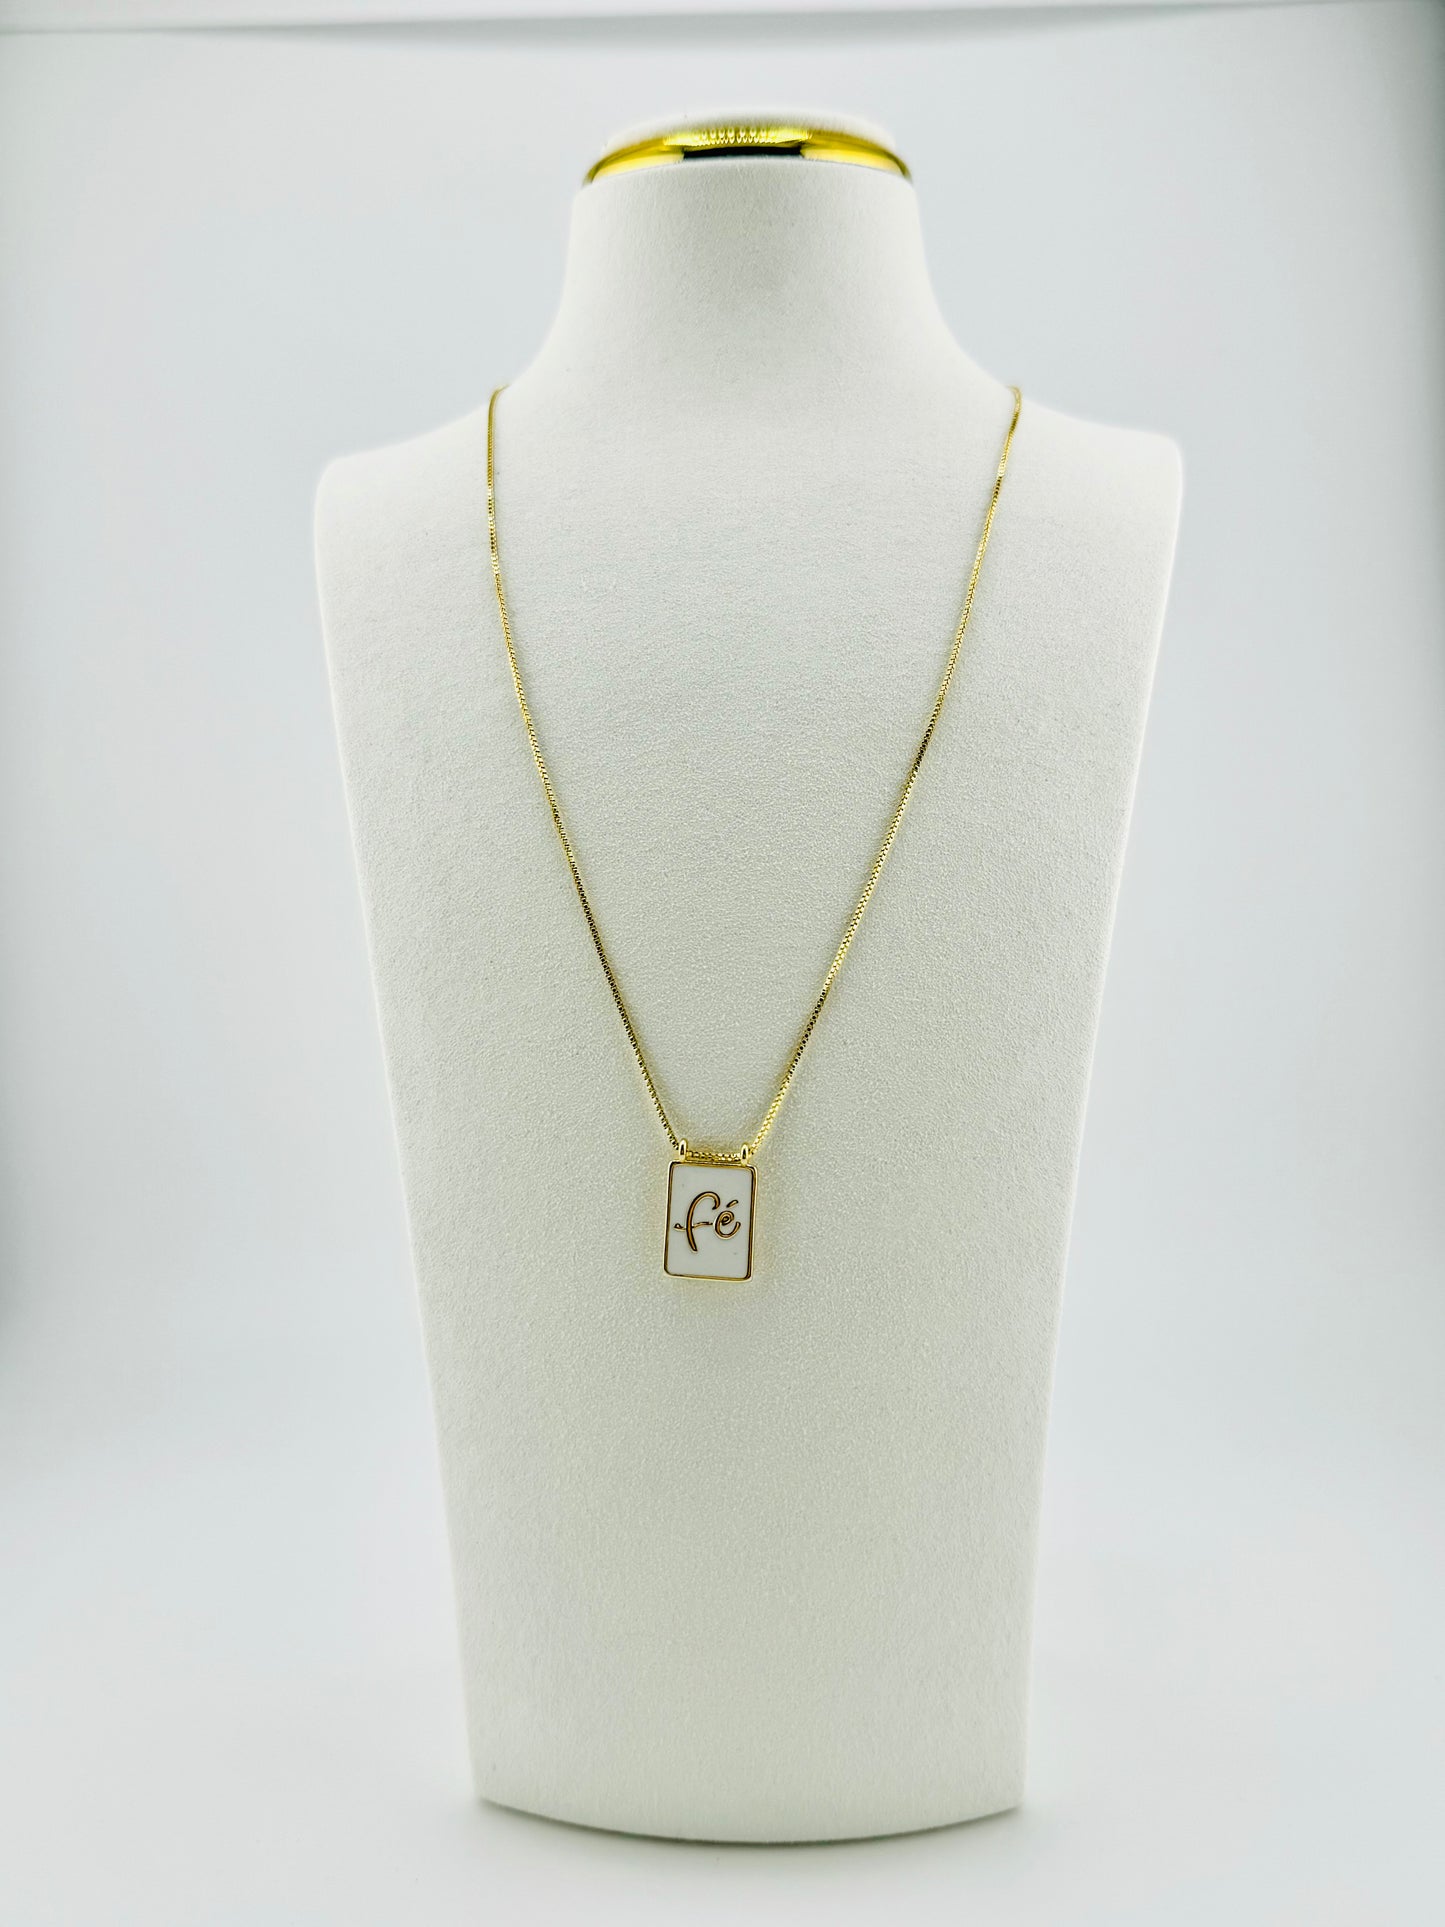 Faith 18k gold filled necklace